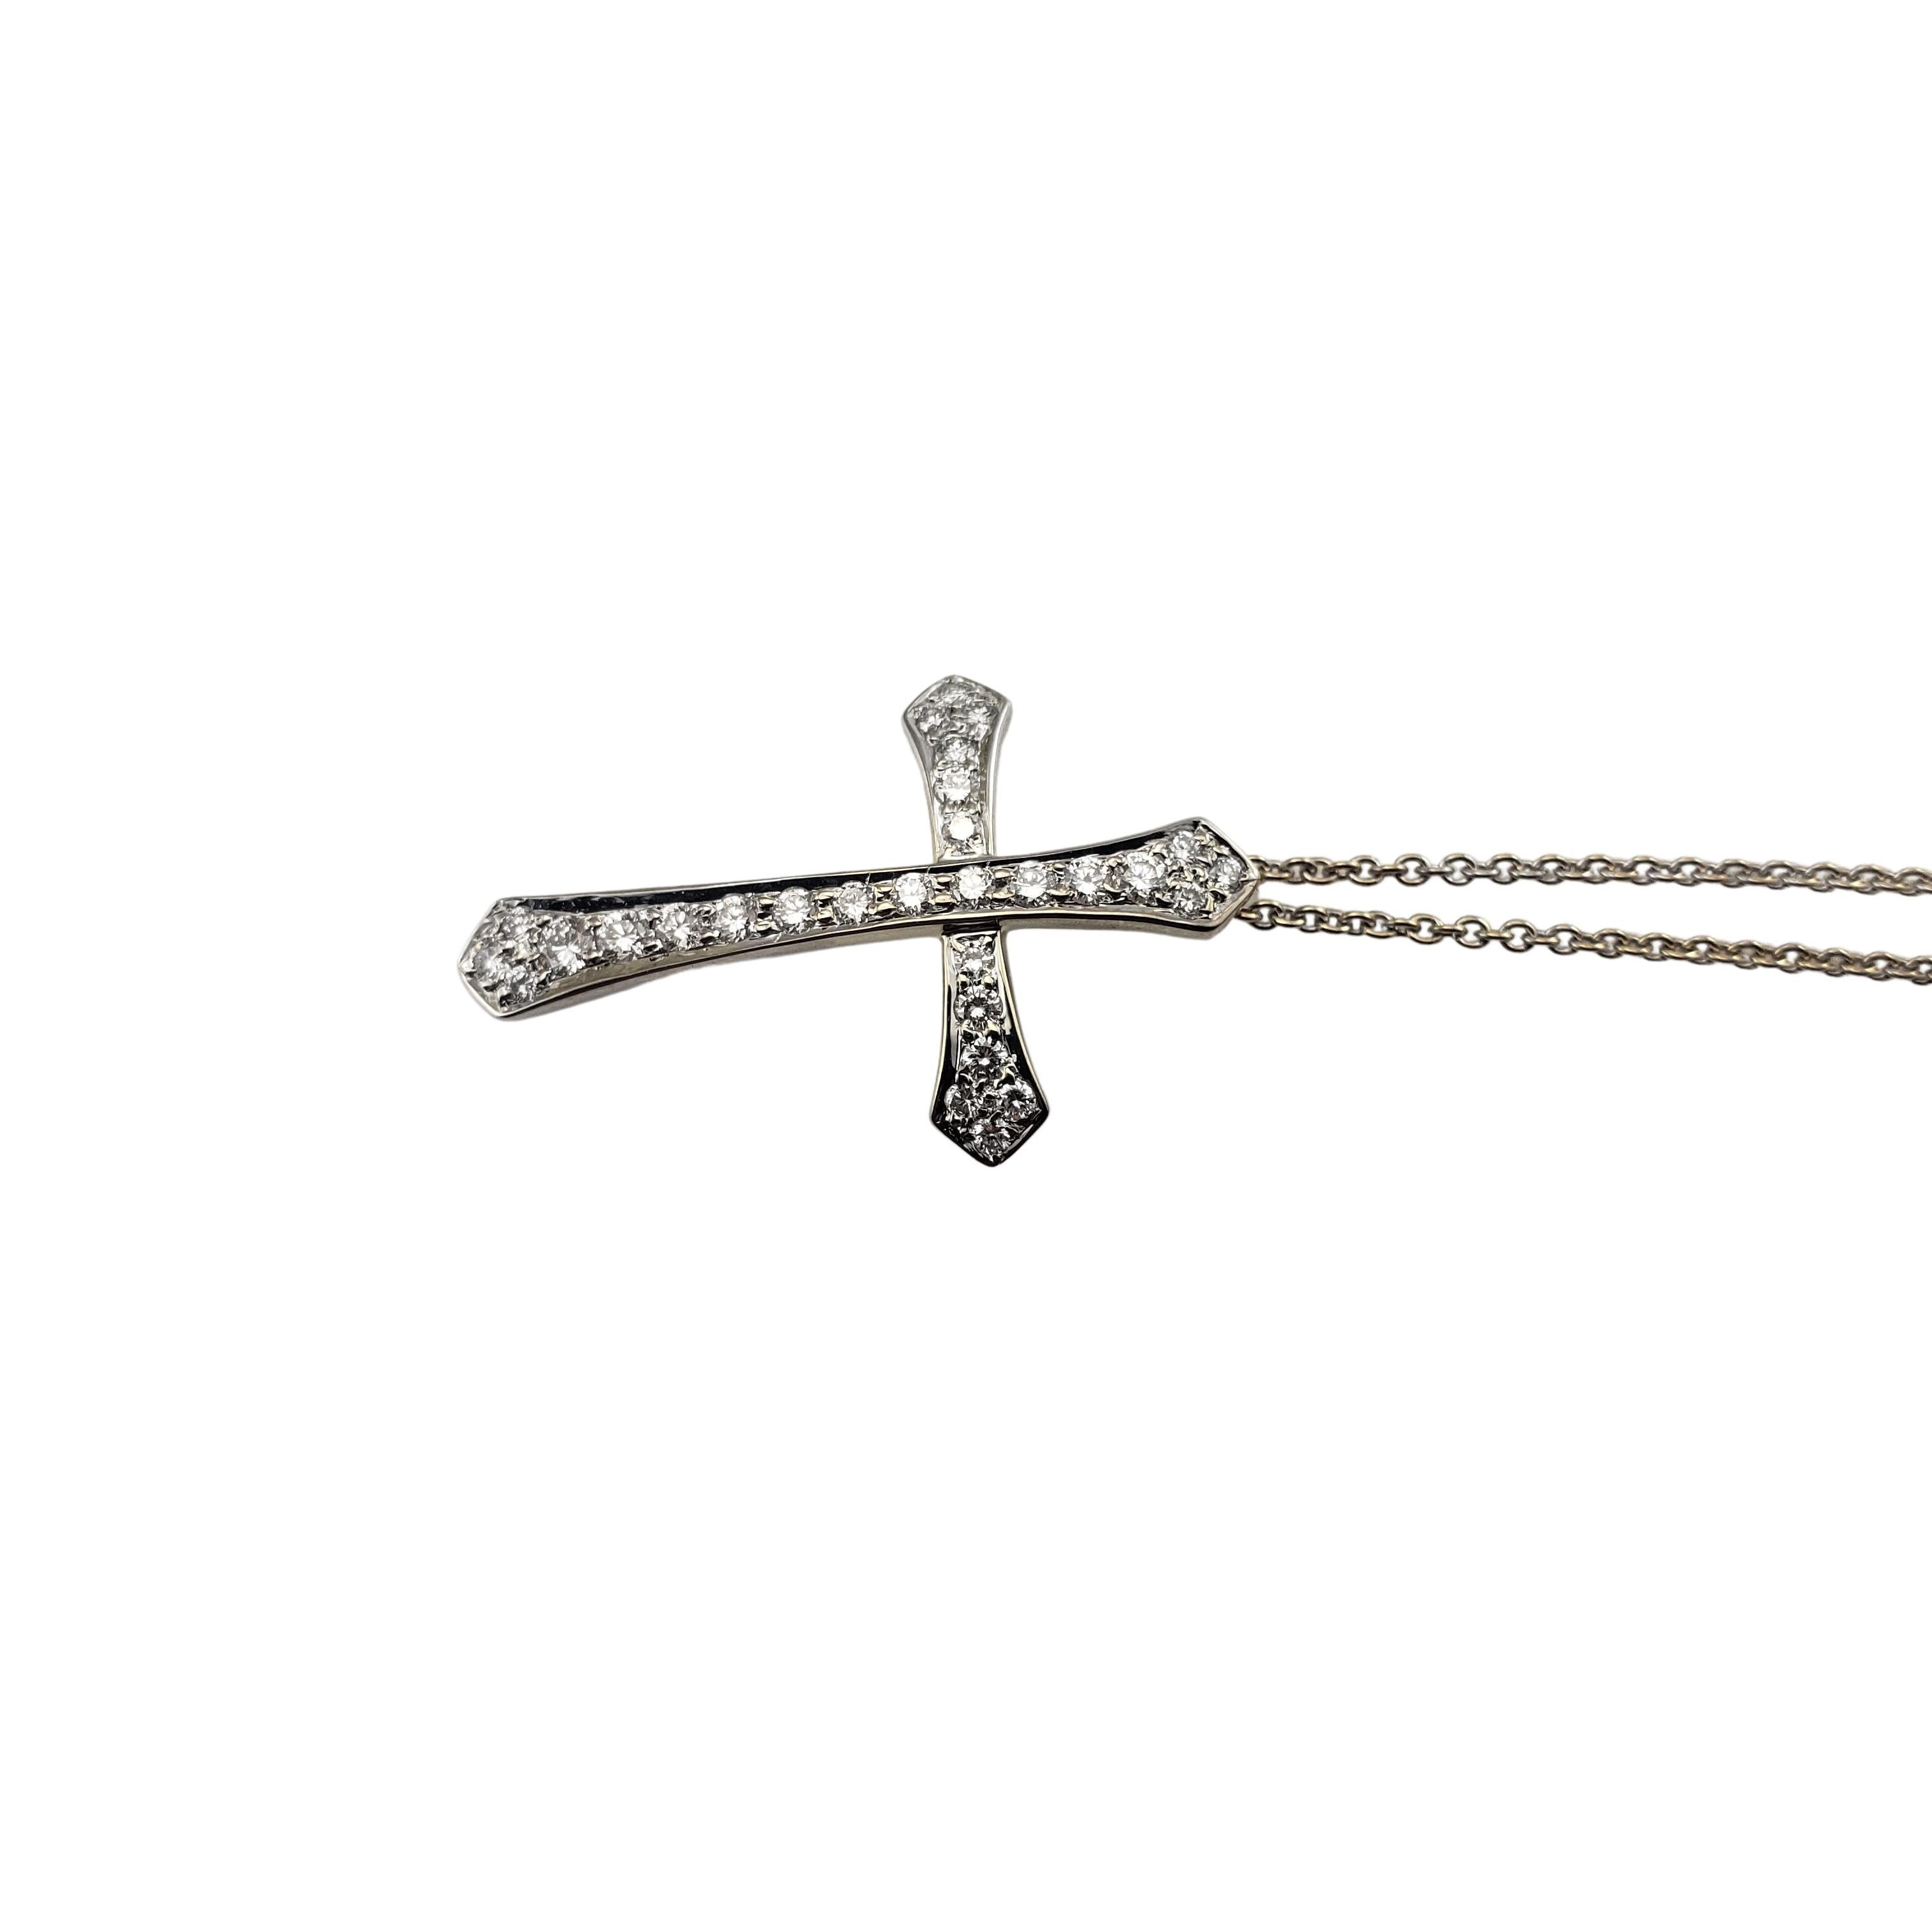 18 Karat White Gold and Diamond Cross Pendant Necklace-

This lovely cross pendant features 29 round brilliant cut diamonds set in classic 18 white gold.  Suspends from a classic cable necklace. 

Approximate total diamond weight:  .55 ct.

Diamond